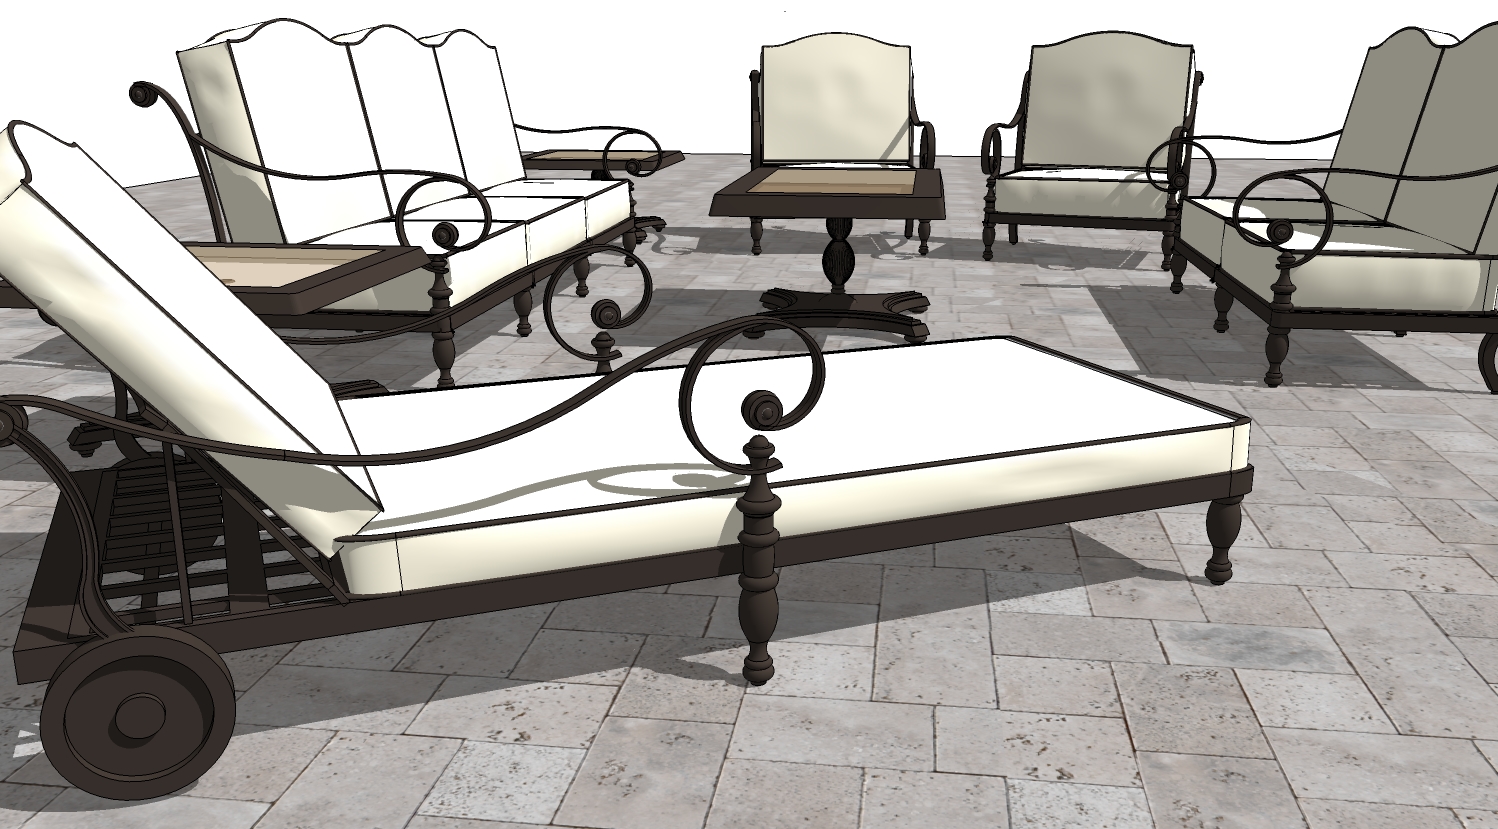 Sketchup model of the patio furniture I built